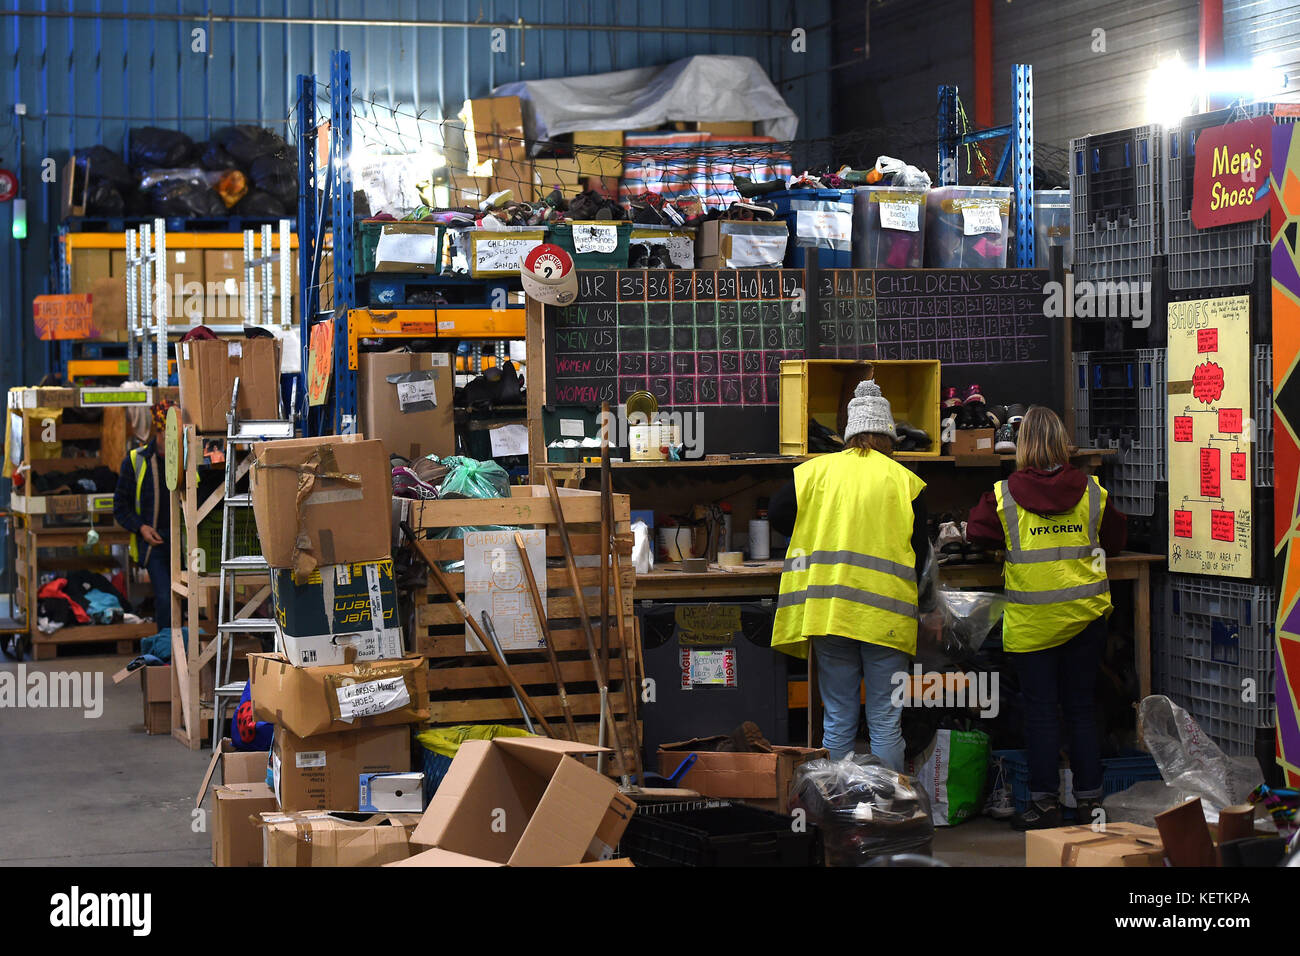 Volunteers sort donations at a warehouse in Calais where charities including Help Refugees and Care4Calais are providing food, clothing and personal hygiene items to migrants around the town, as one year on from the demolition of the camp dubbed "The Jungle" migrants continue to stay in Calais and attempt to cross the border to the UK. Stock Photo